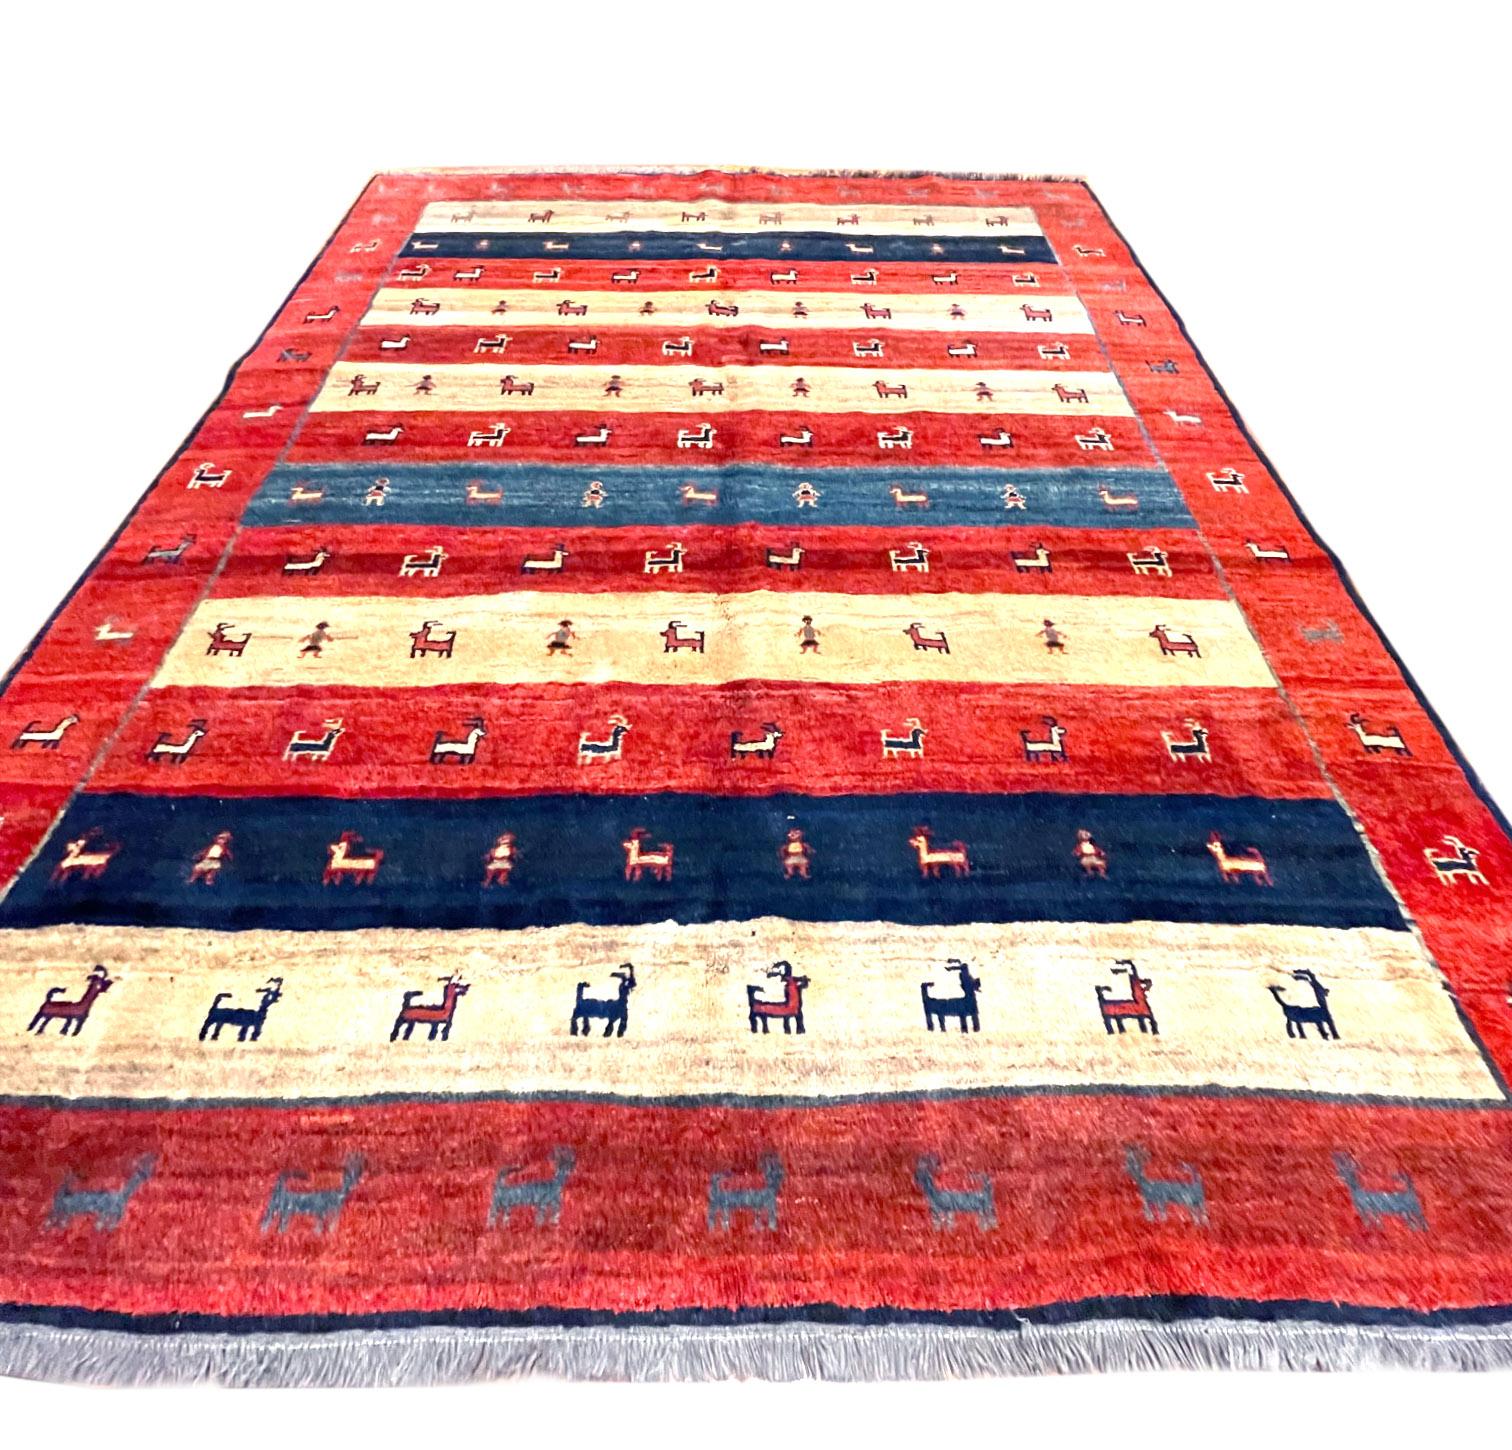 This stunning piece is a hand-knotted Persian Gabbeh rug. Gabbeh rugs are a variety of Persian hand knotted carpets which mostly are made by nomadic Qashqai tribes in southern Iran (Shiraz). This unique piece has created from high quality hand spun